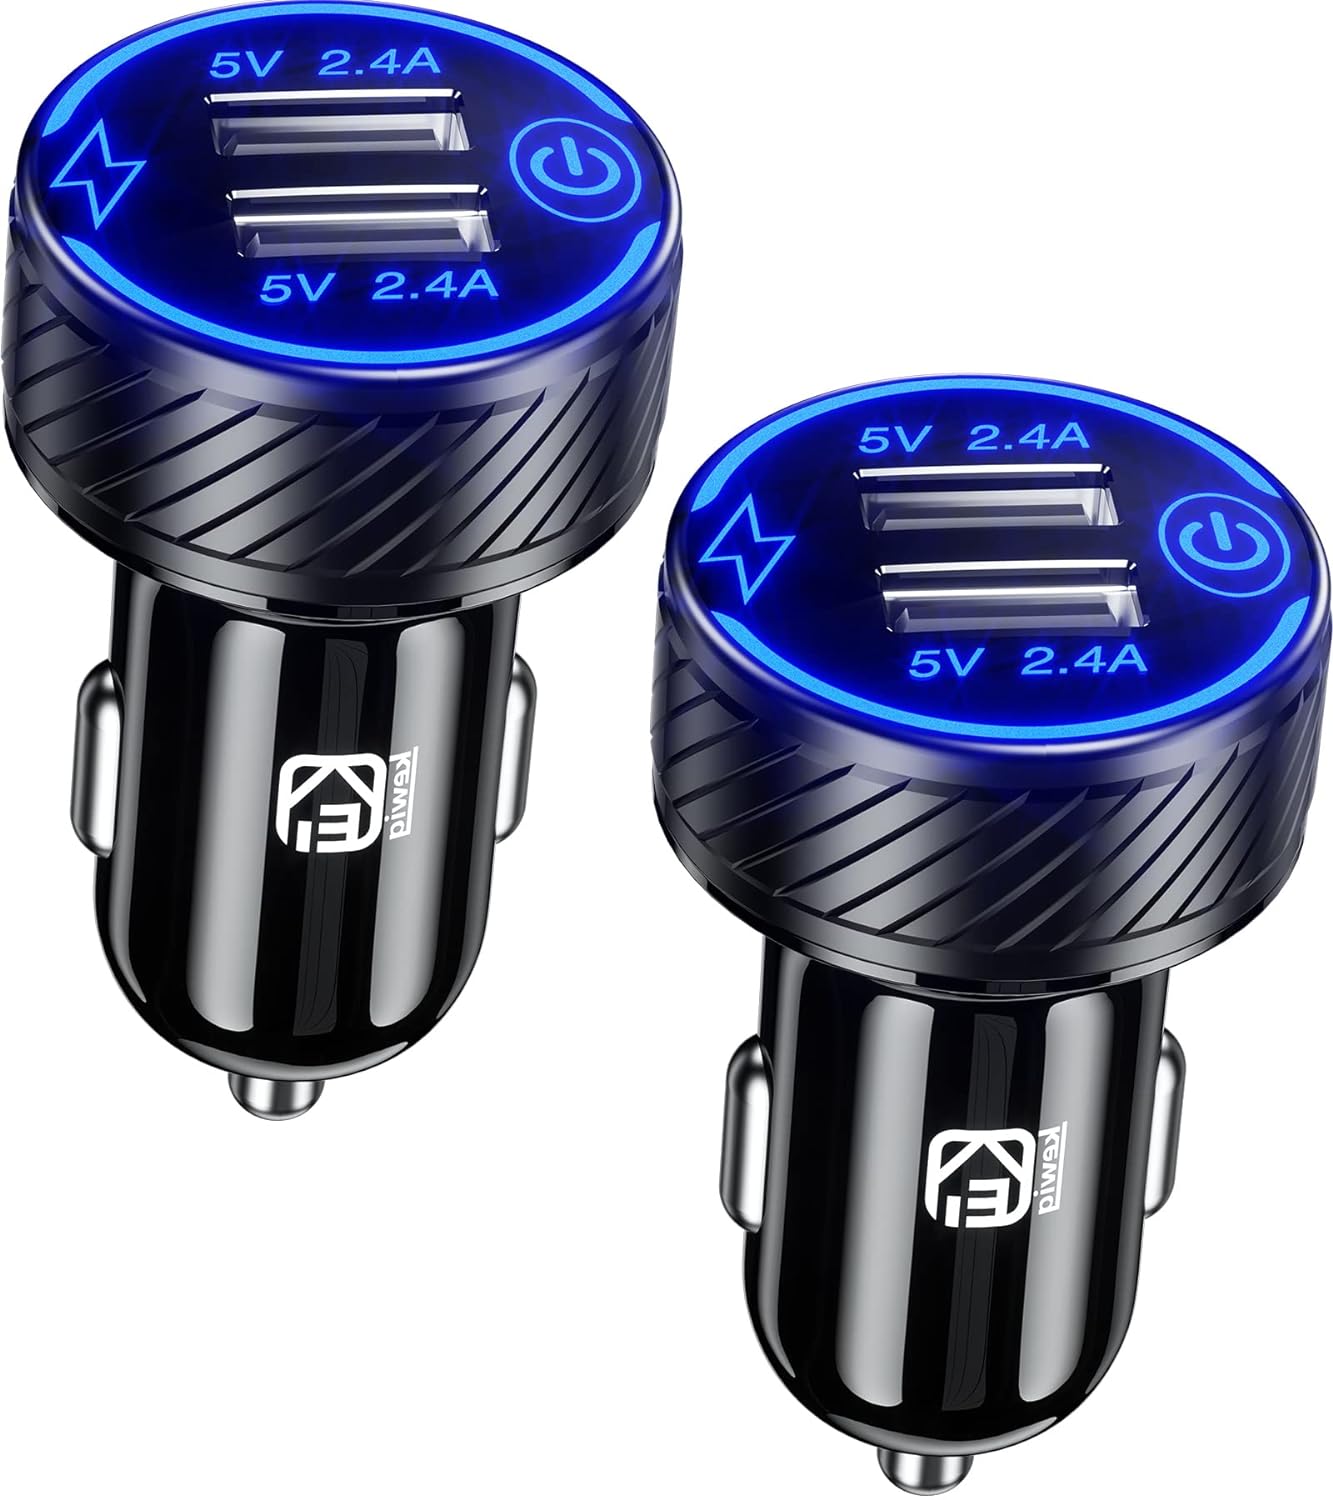 【2Pack】 USB Car Charger, Dual USB Port Car Charger Adapter, 5V/4.8A Charge Car Phone Charger with Blue LED & Touch Switch Fit for iPhone 13/12 Pro/Max/8, Galaxy S21/20/10/9 (Black)